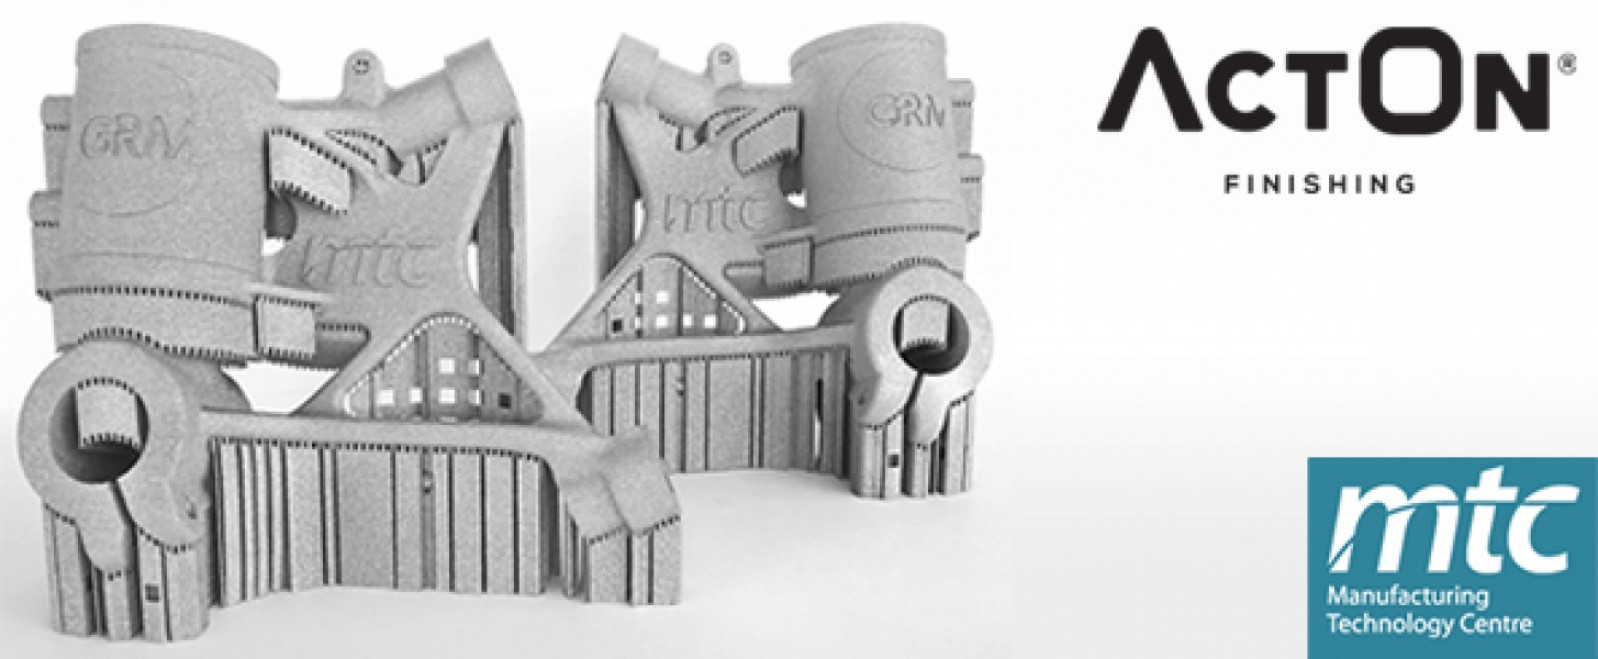 ActOn Finishing partnerships with The MTC to develop mass finishing processes for additive manufactured parts